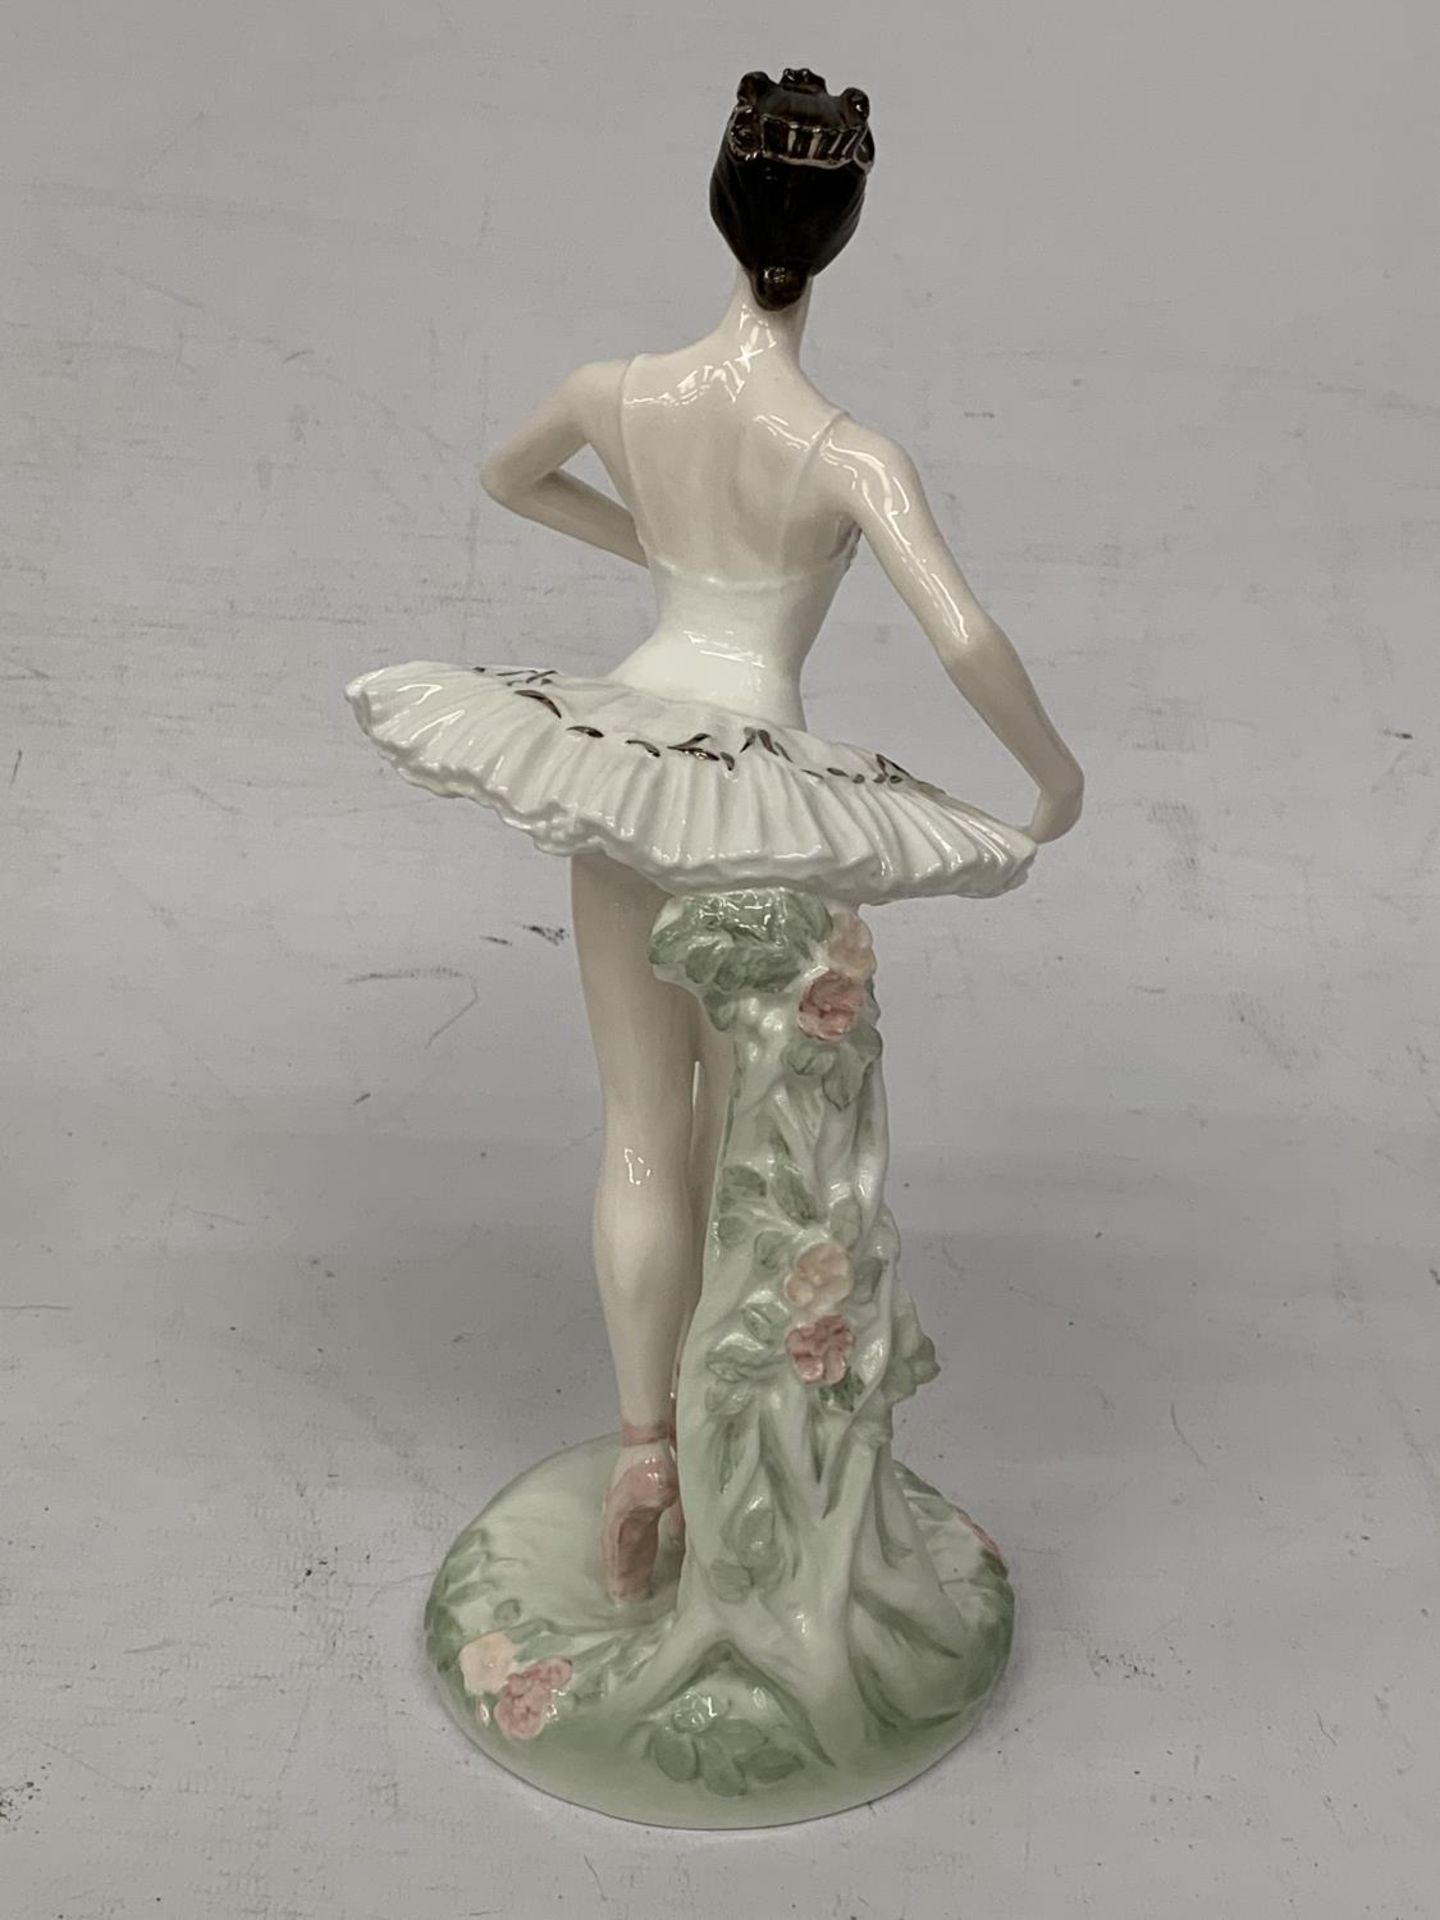 A COALPORT FIGURINE "DAME BERYL GREY" FROM THE ROYAL ACADEMY OF DANCING COLLECTION CELEBRATING THE - Image 3 of 5